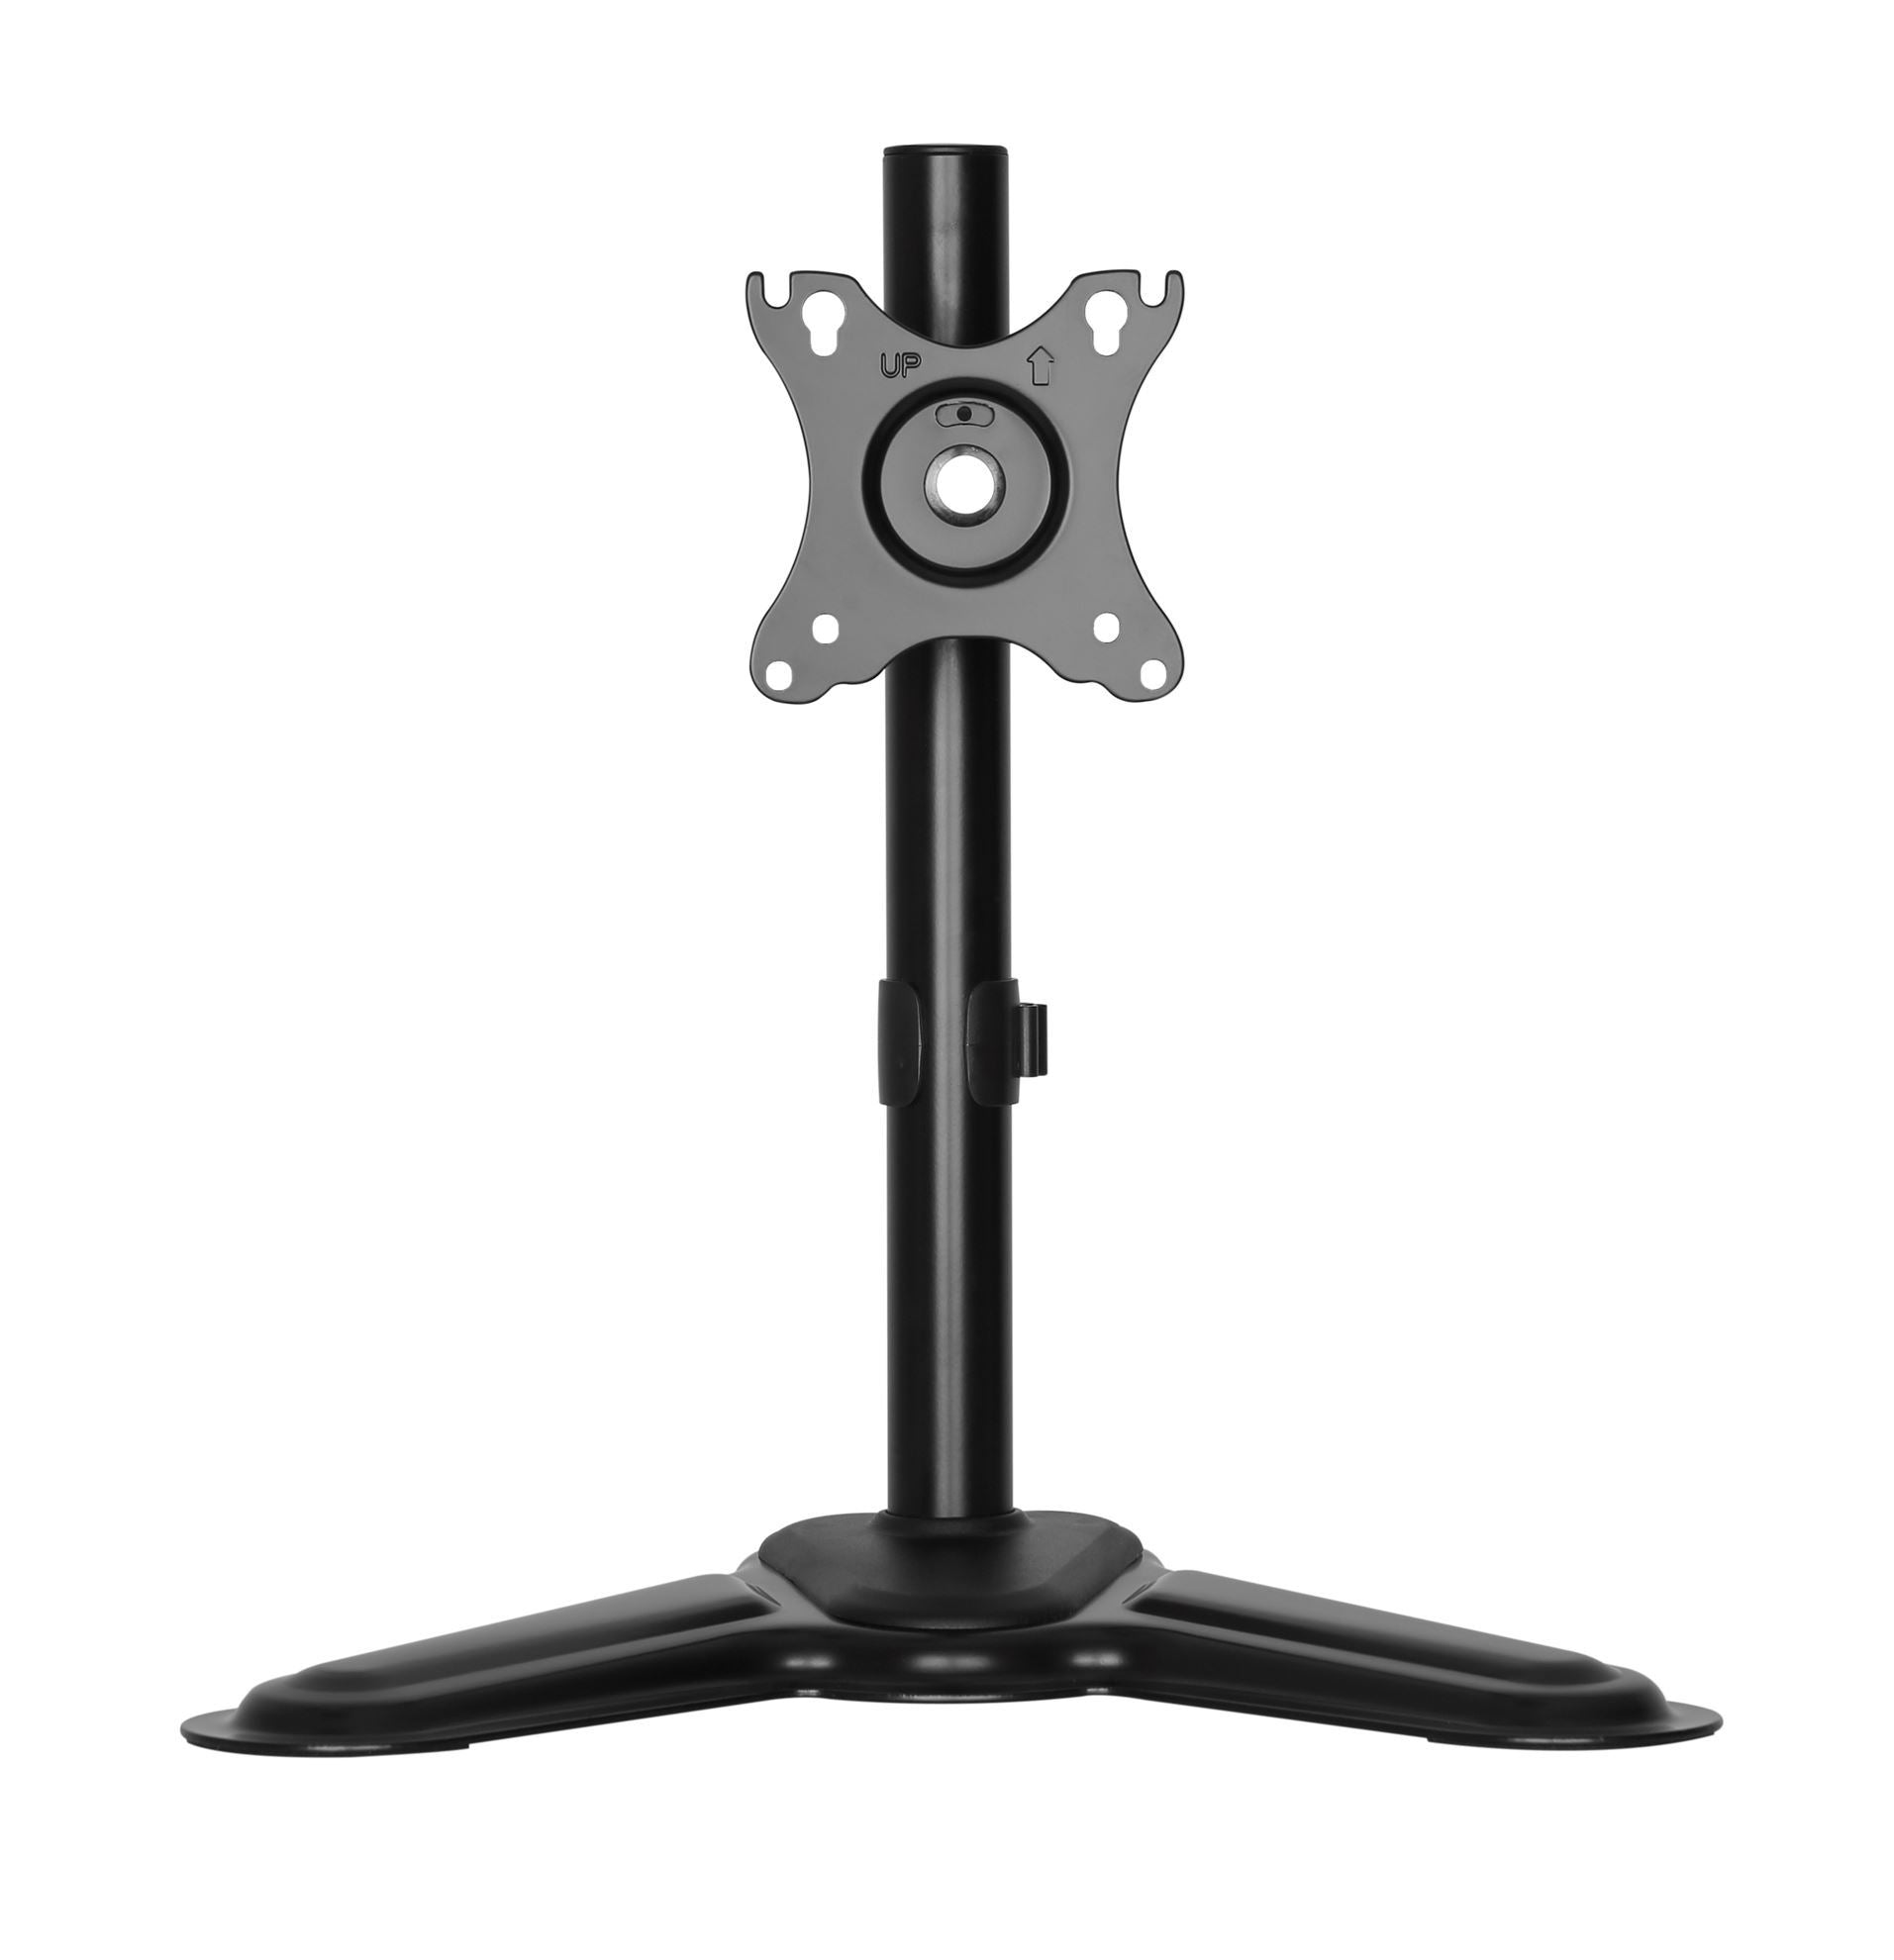 BRATECK 17''-32'' Single Screen Articulating Monitor Stand. Free-Tilting Design, Sturdy Steel Base, 360 Rotary VESA Plate